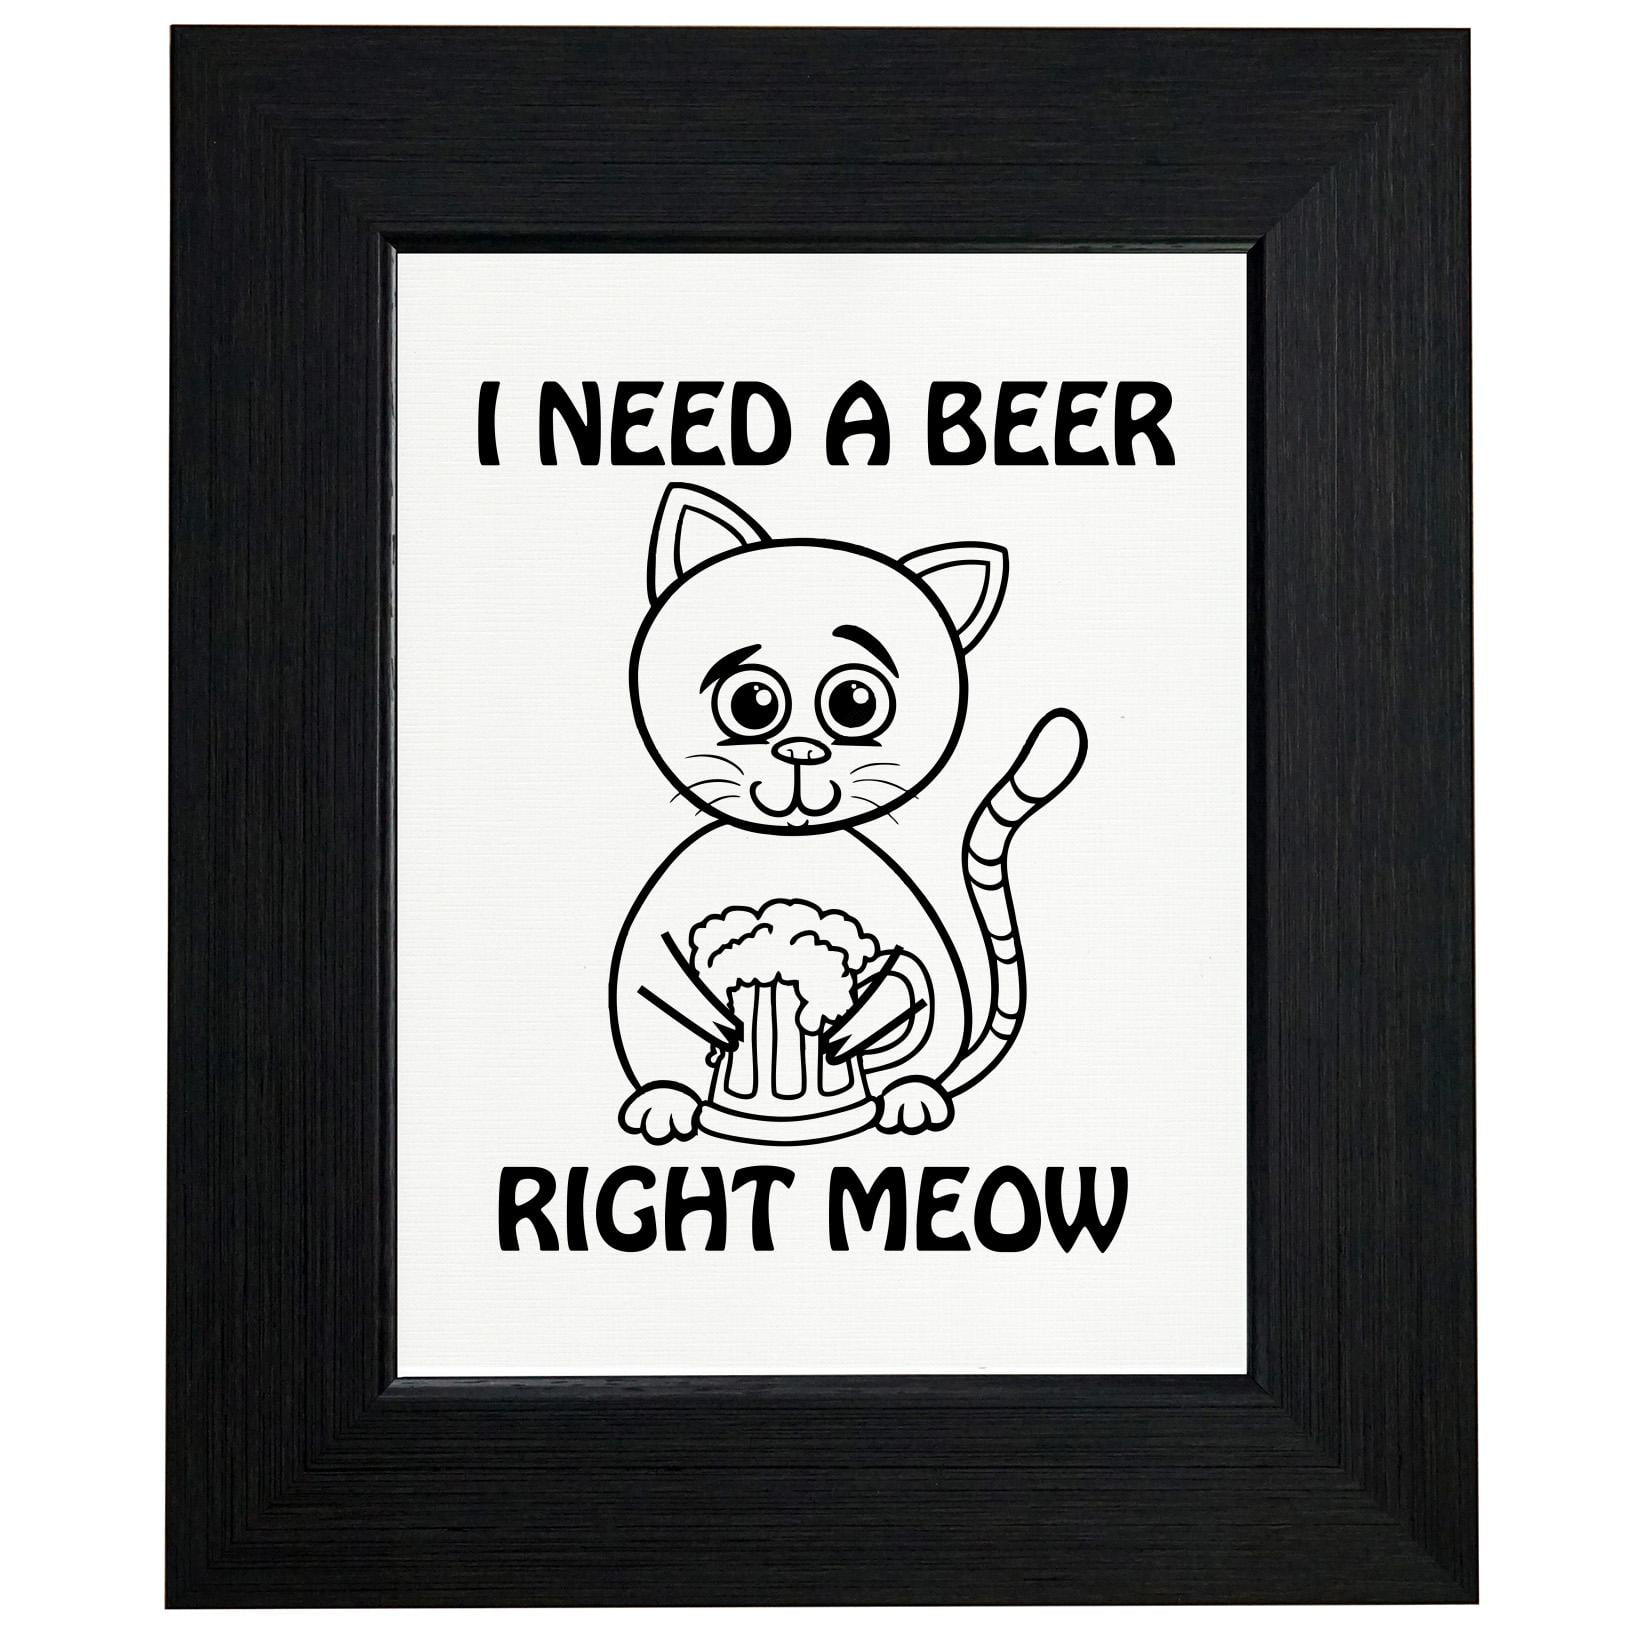 Beer Cat - I Need A Beer Right Meow - Funny Framed Print Poster Wall or ...